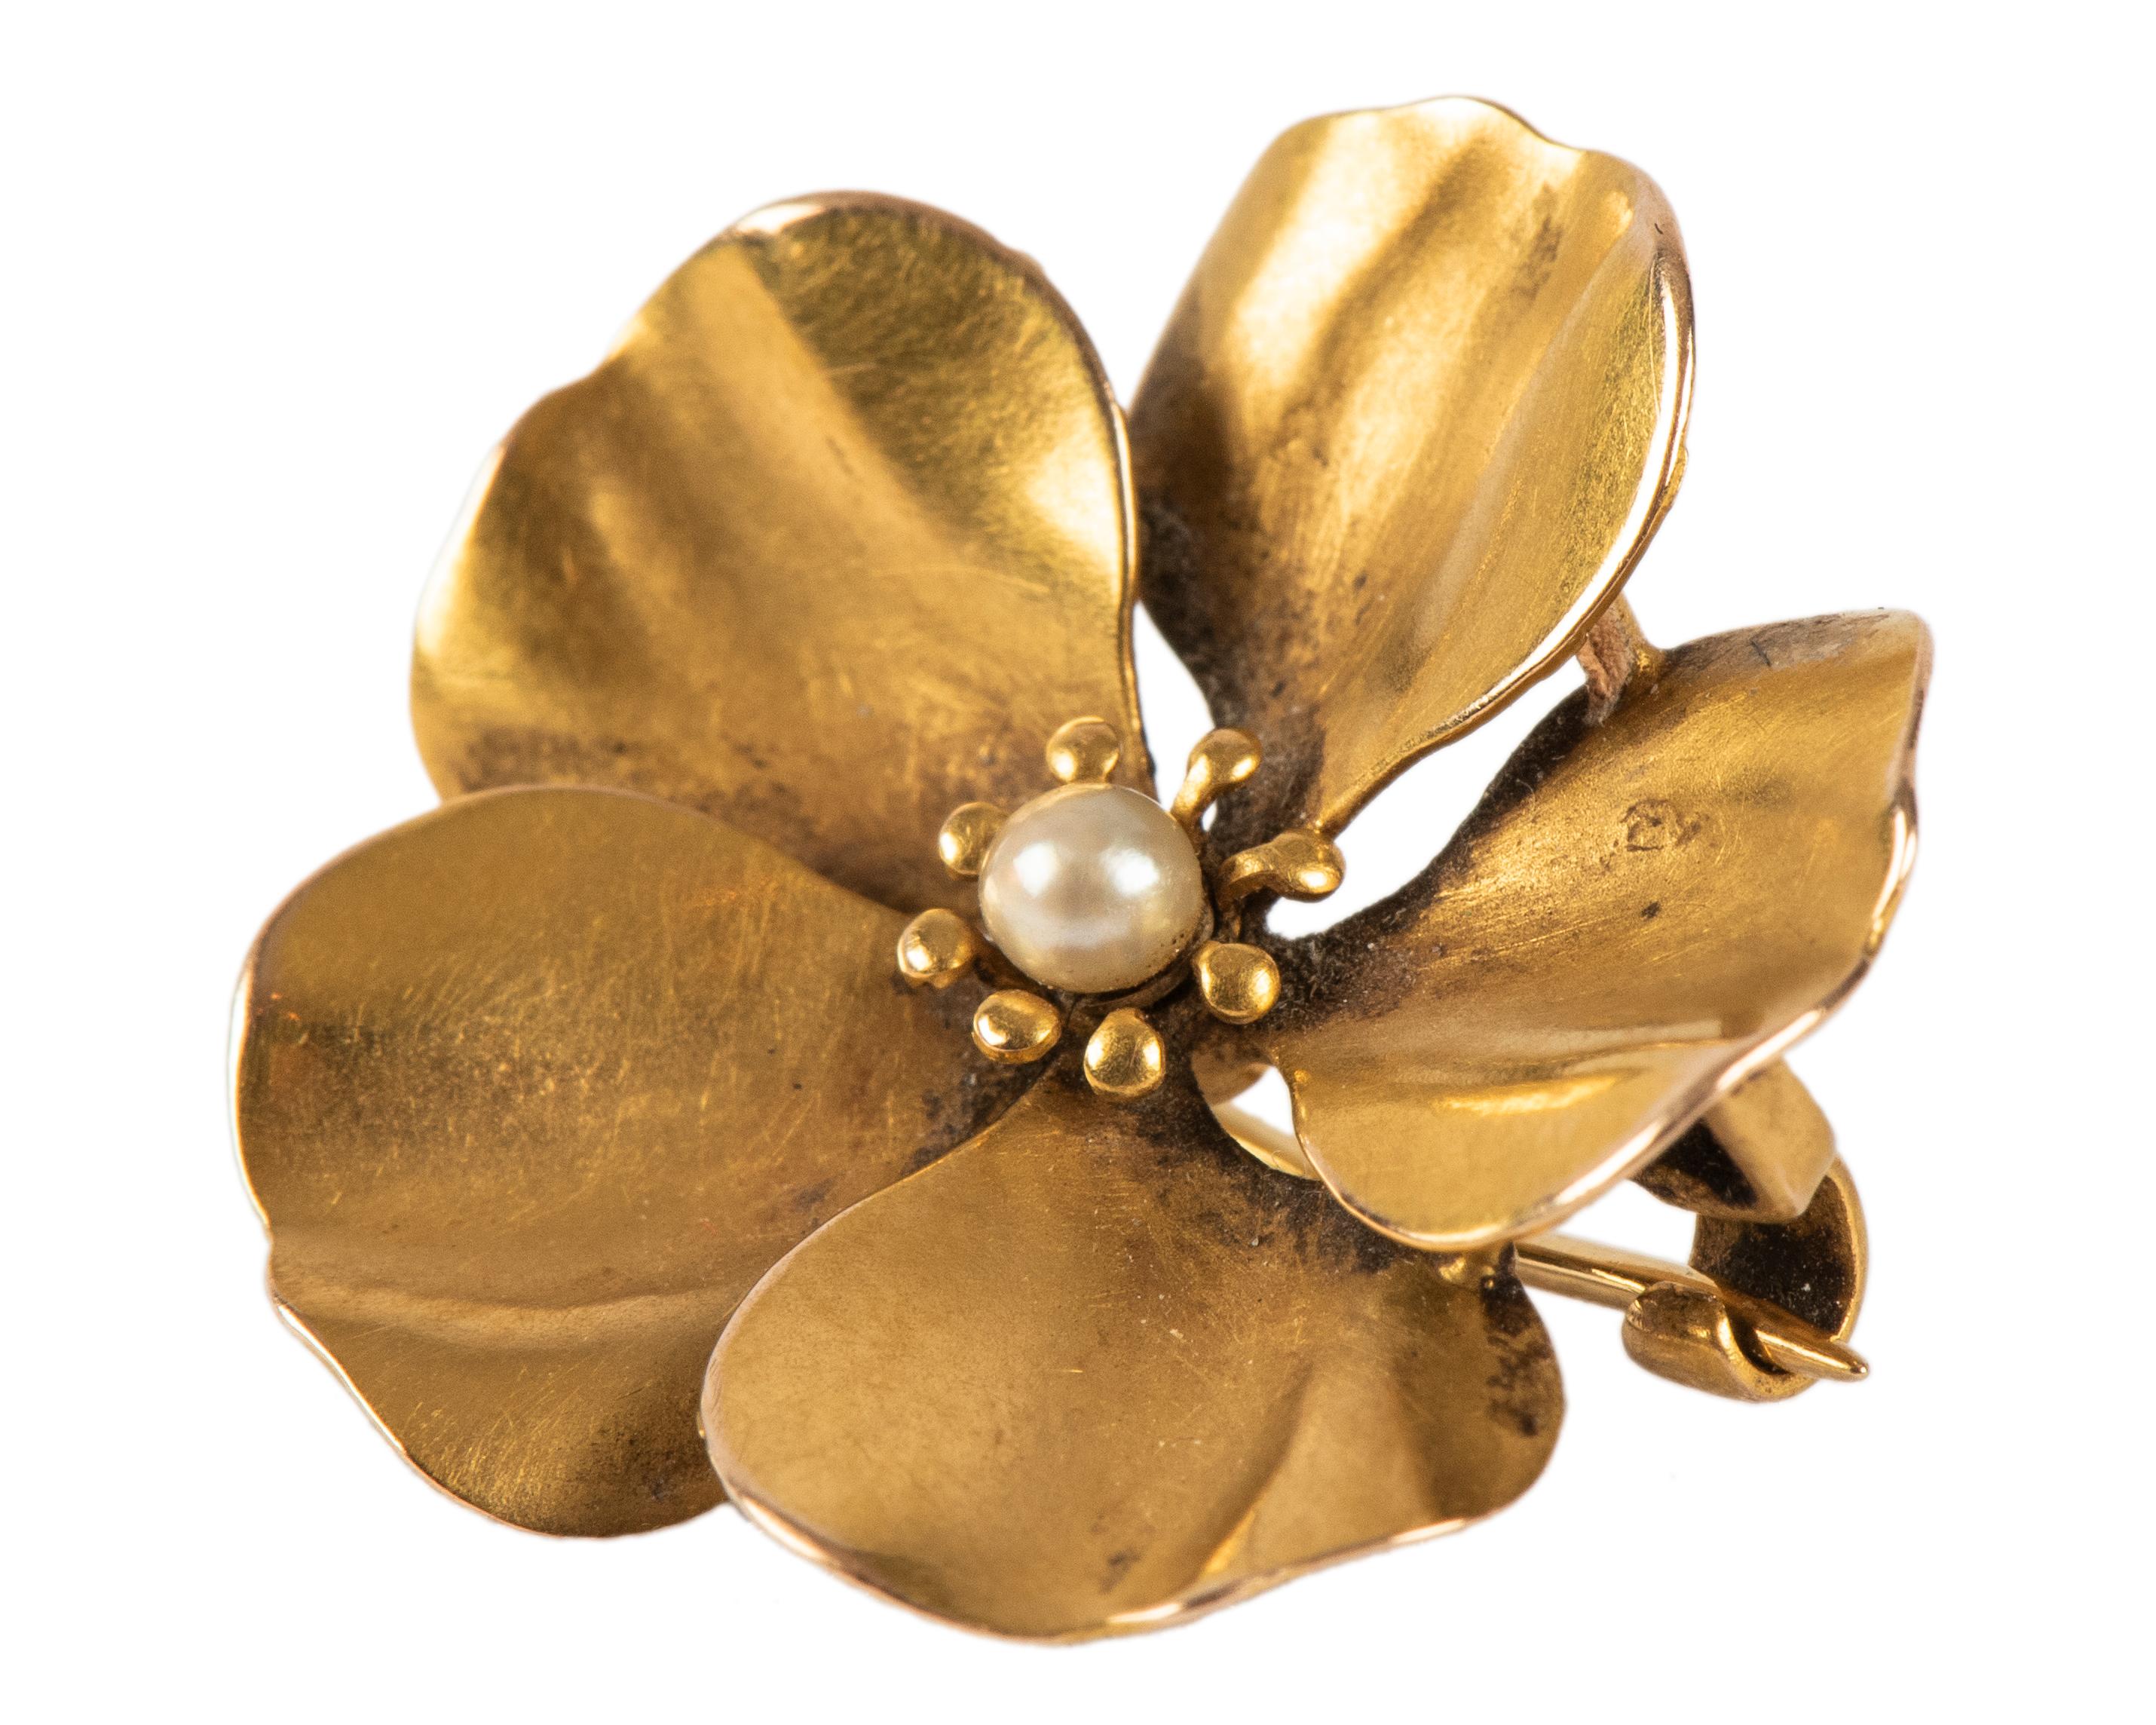 A small gold pansy pin with overlapping petals of matte gold centering a seed pearl.

American, circa 1890

5/8 in. (1.6 cm) diam.